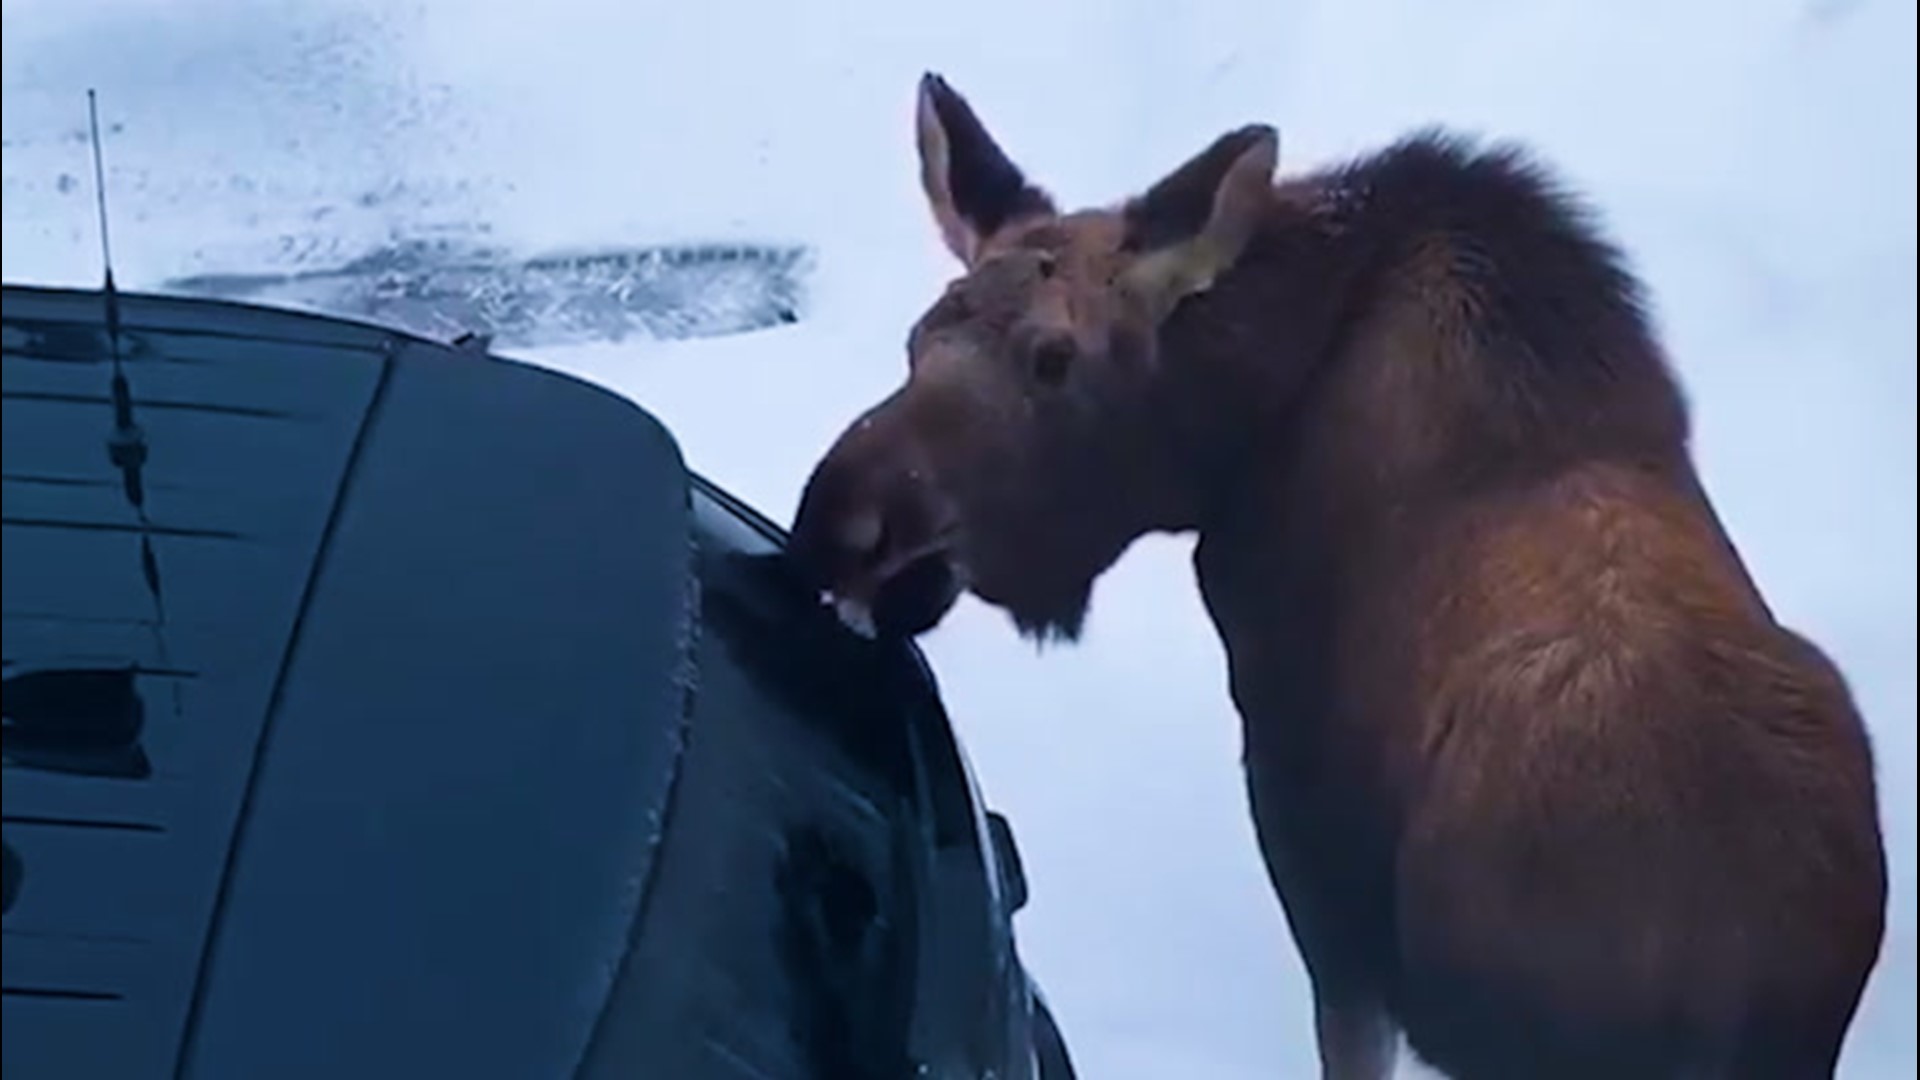 On Feb. 18, a moose started 'washing' a police officer's car in Anchorage, Alaska.